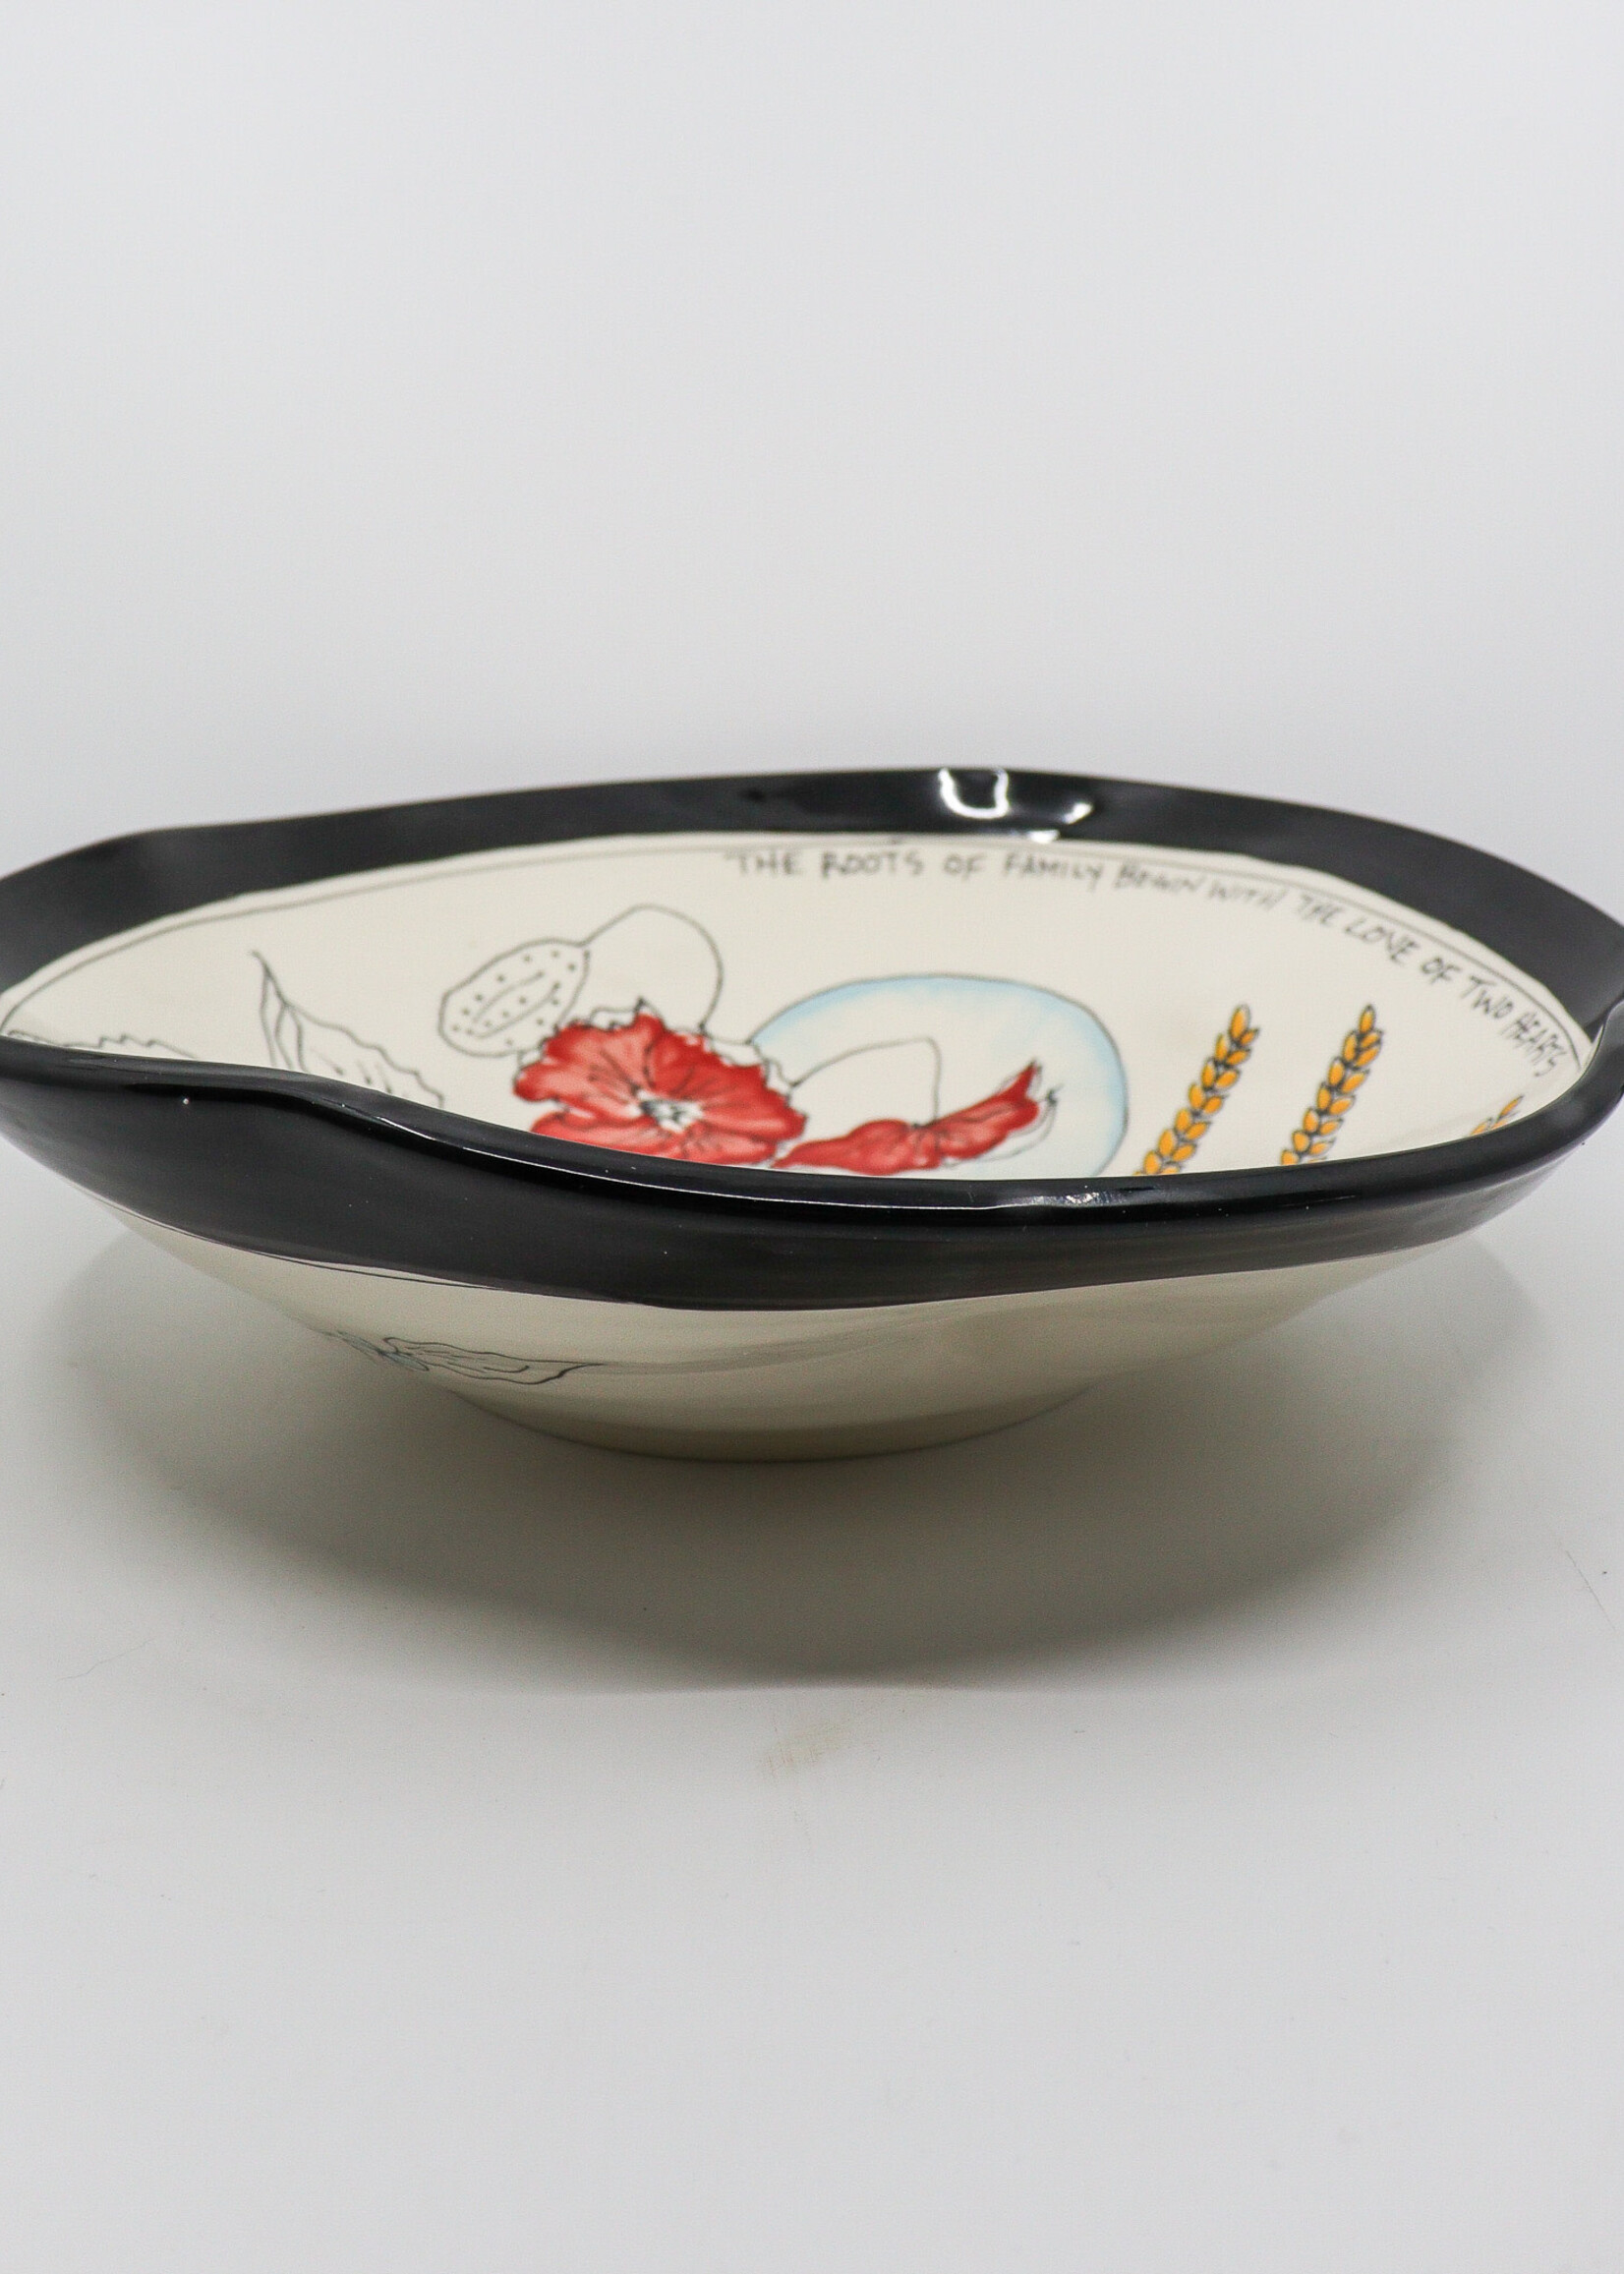 CERAMICS - 12" Bowl, Poppies and Wheat, "The Roots of Family Begin with The Love of Two Hearts"